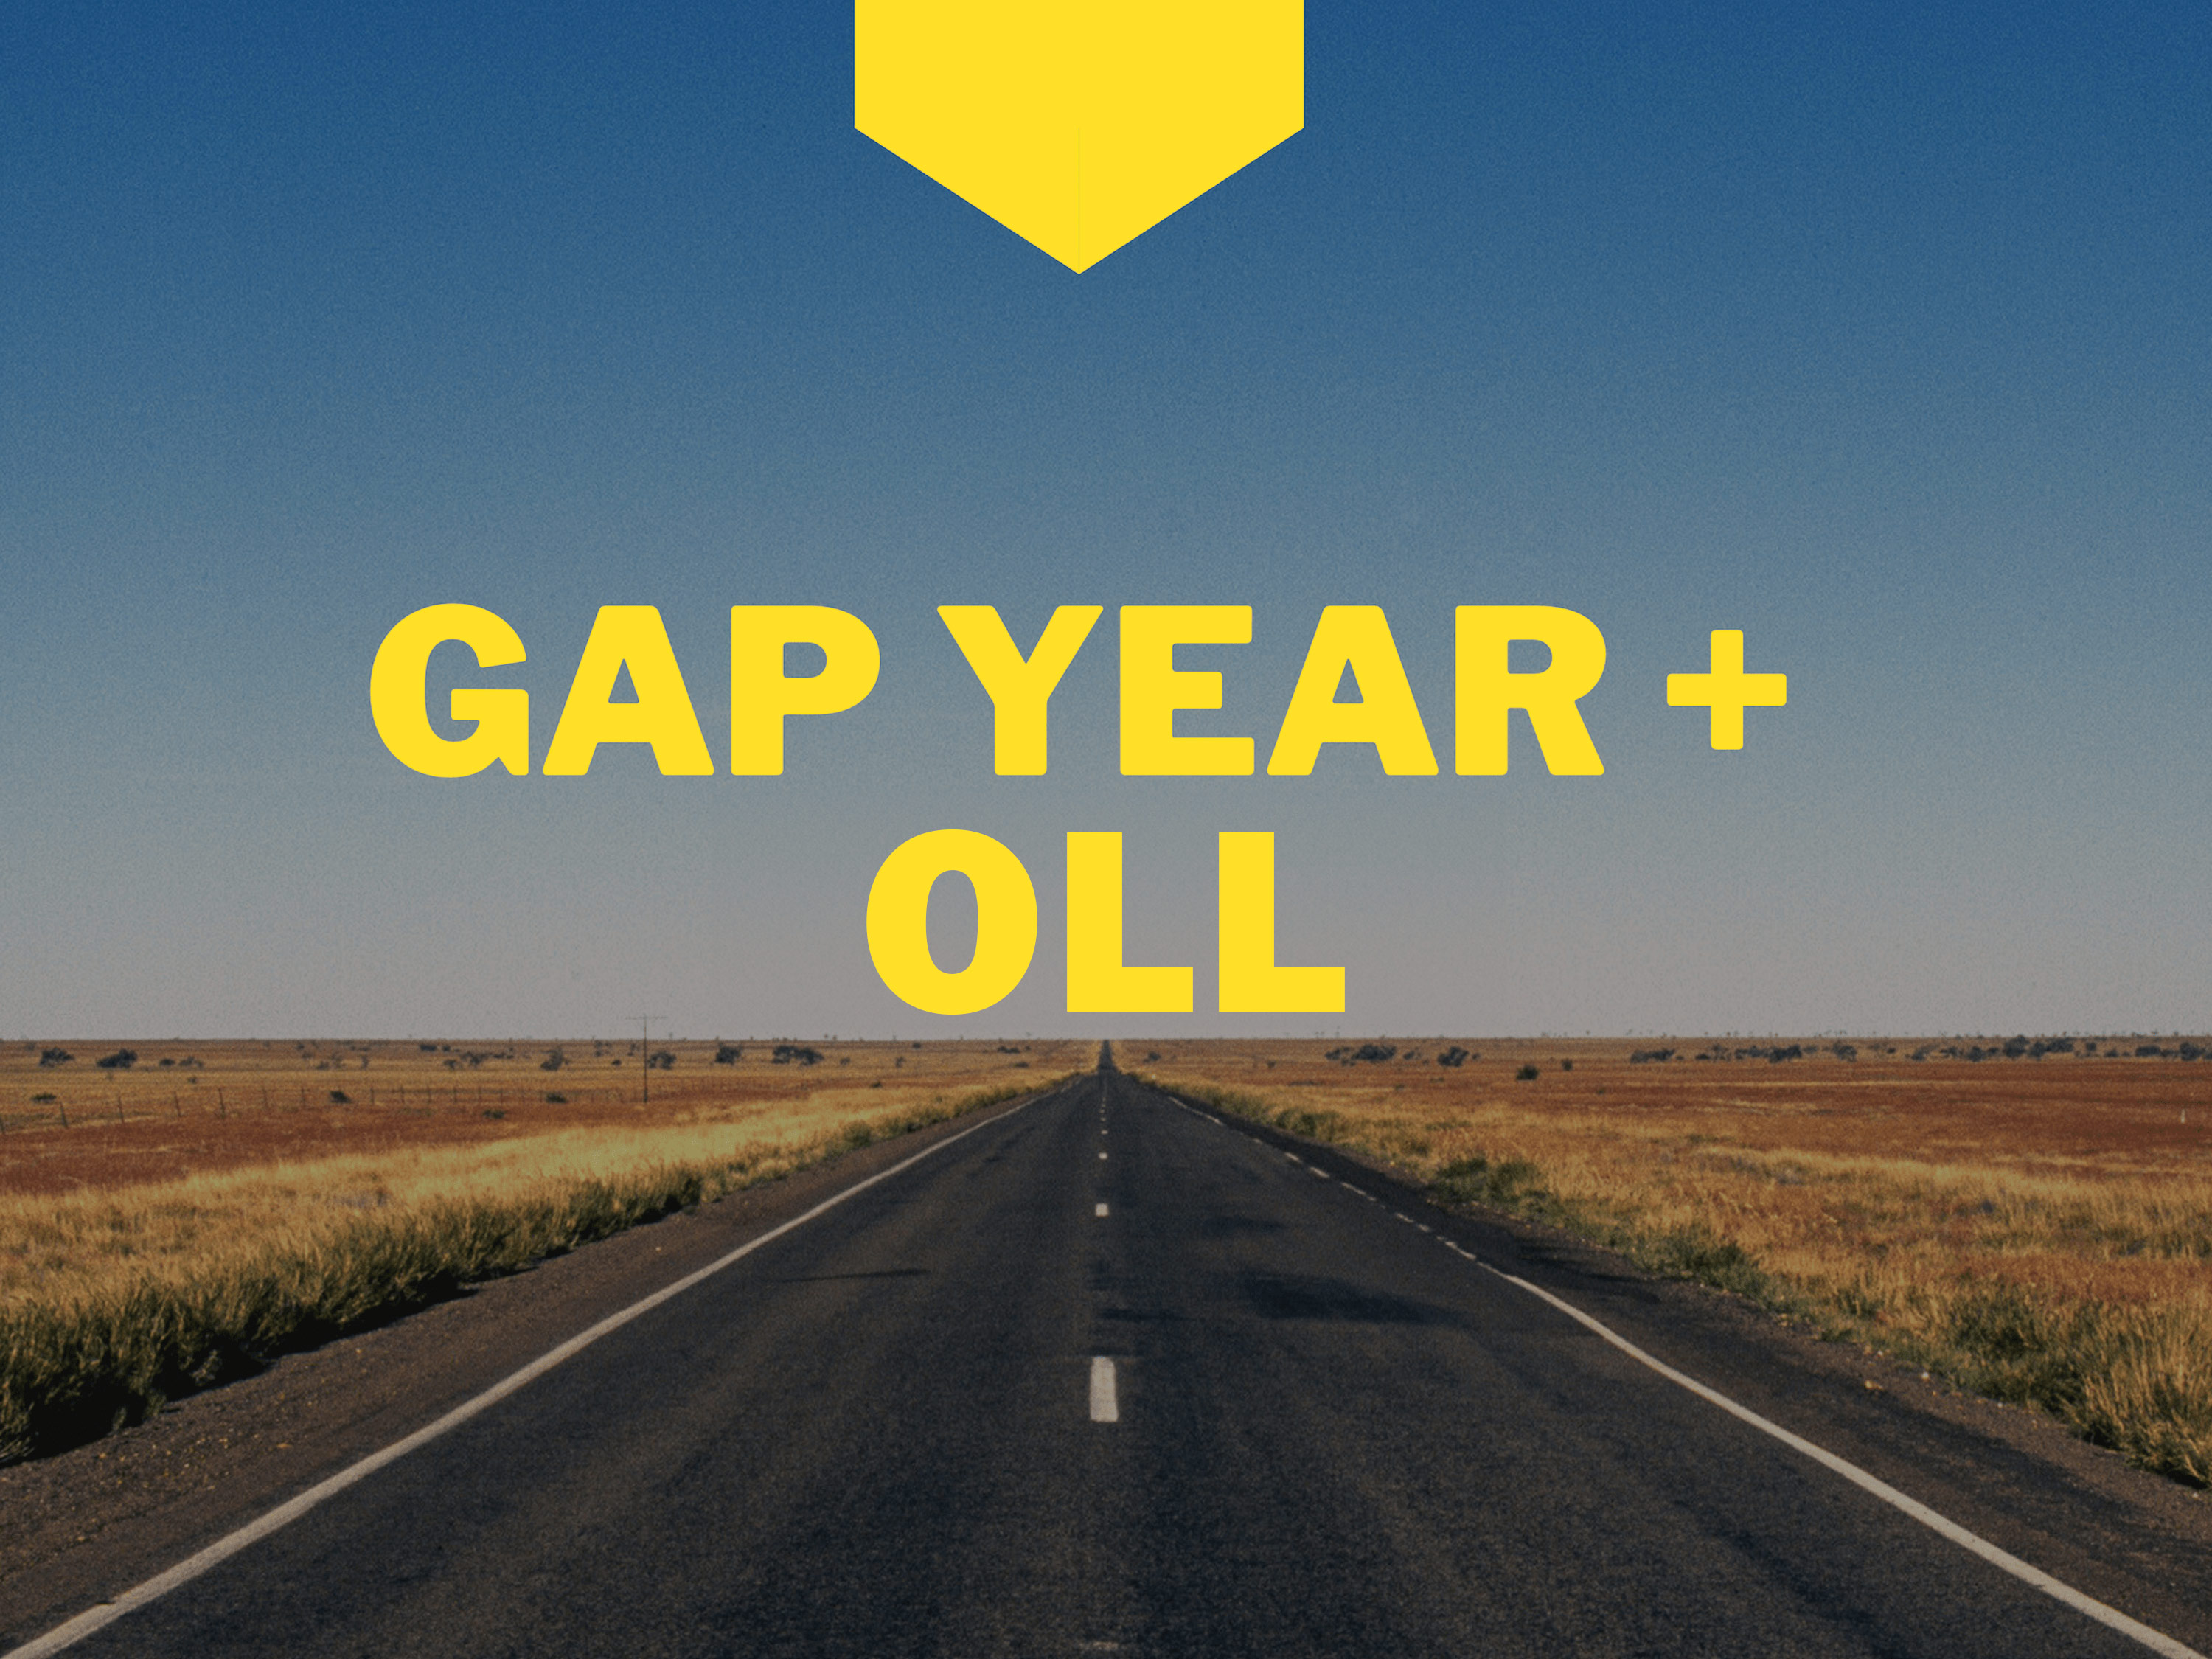 Decorative graphic banner for the Gap Year + OLL program